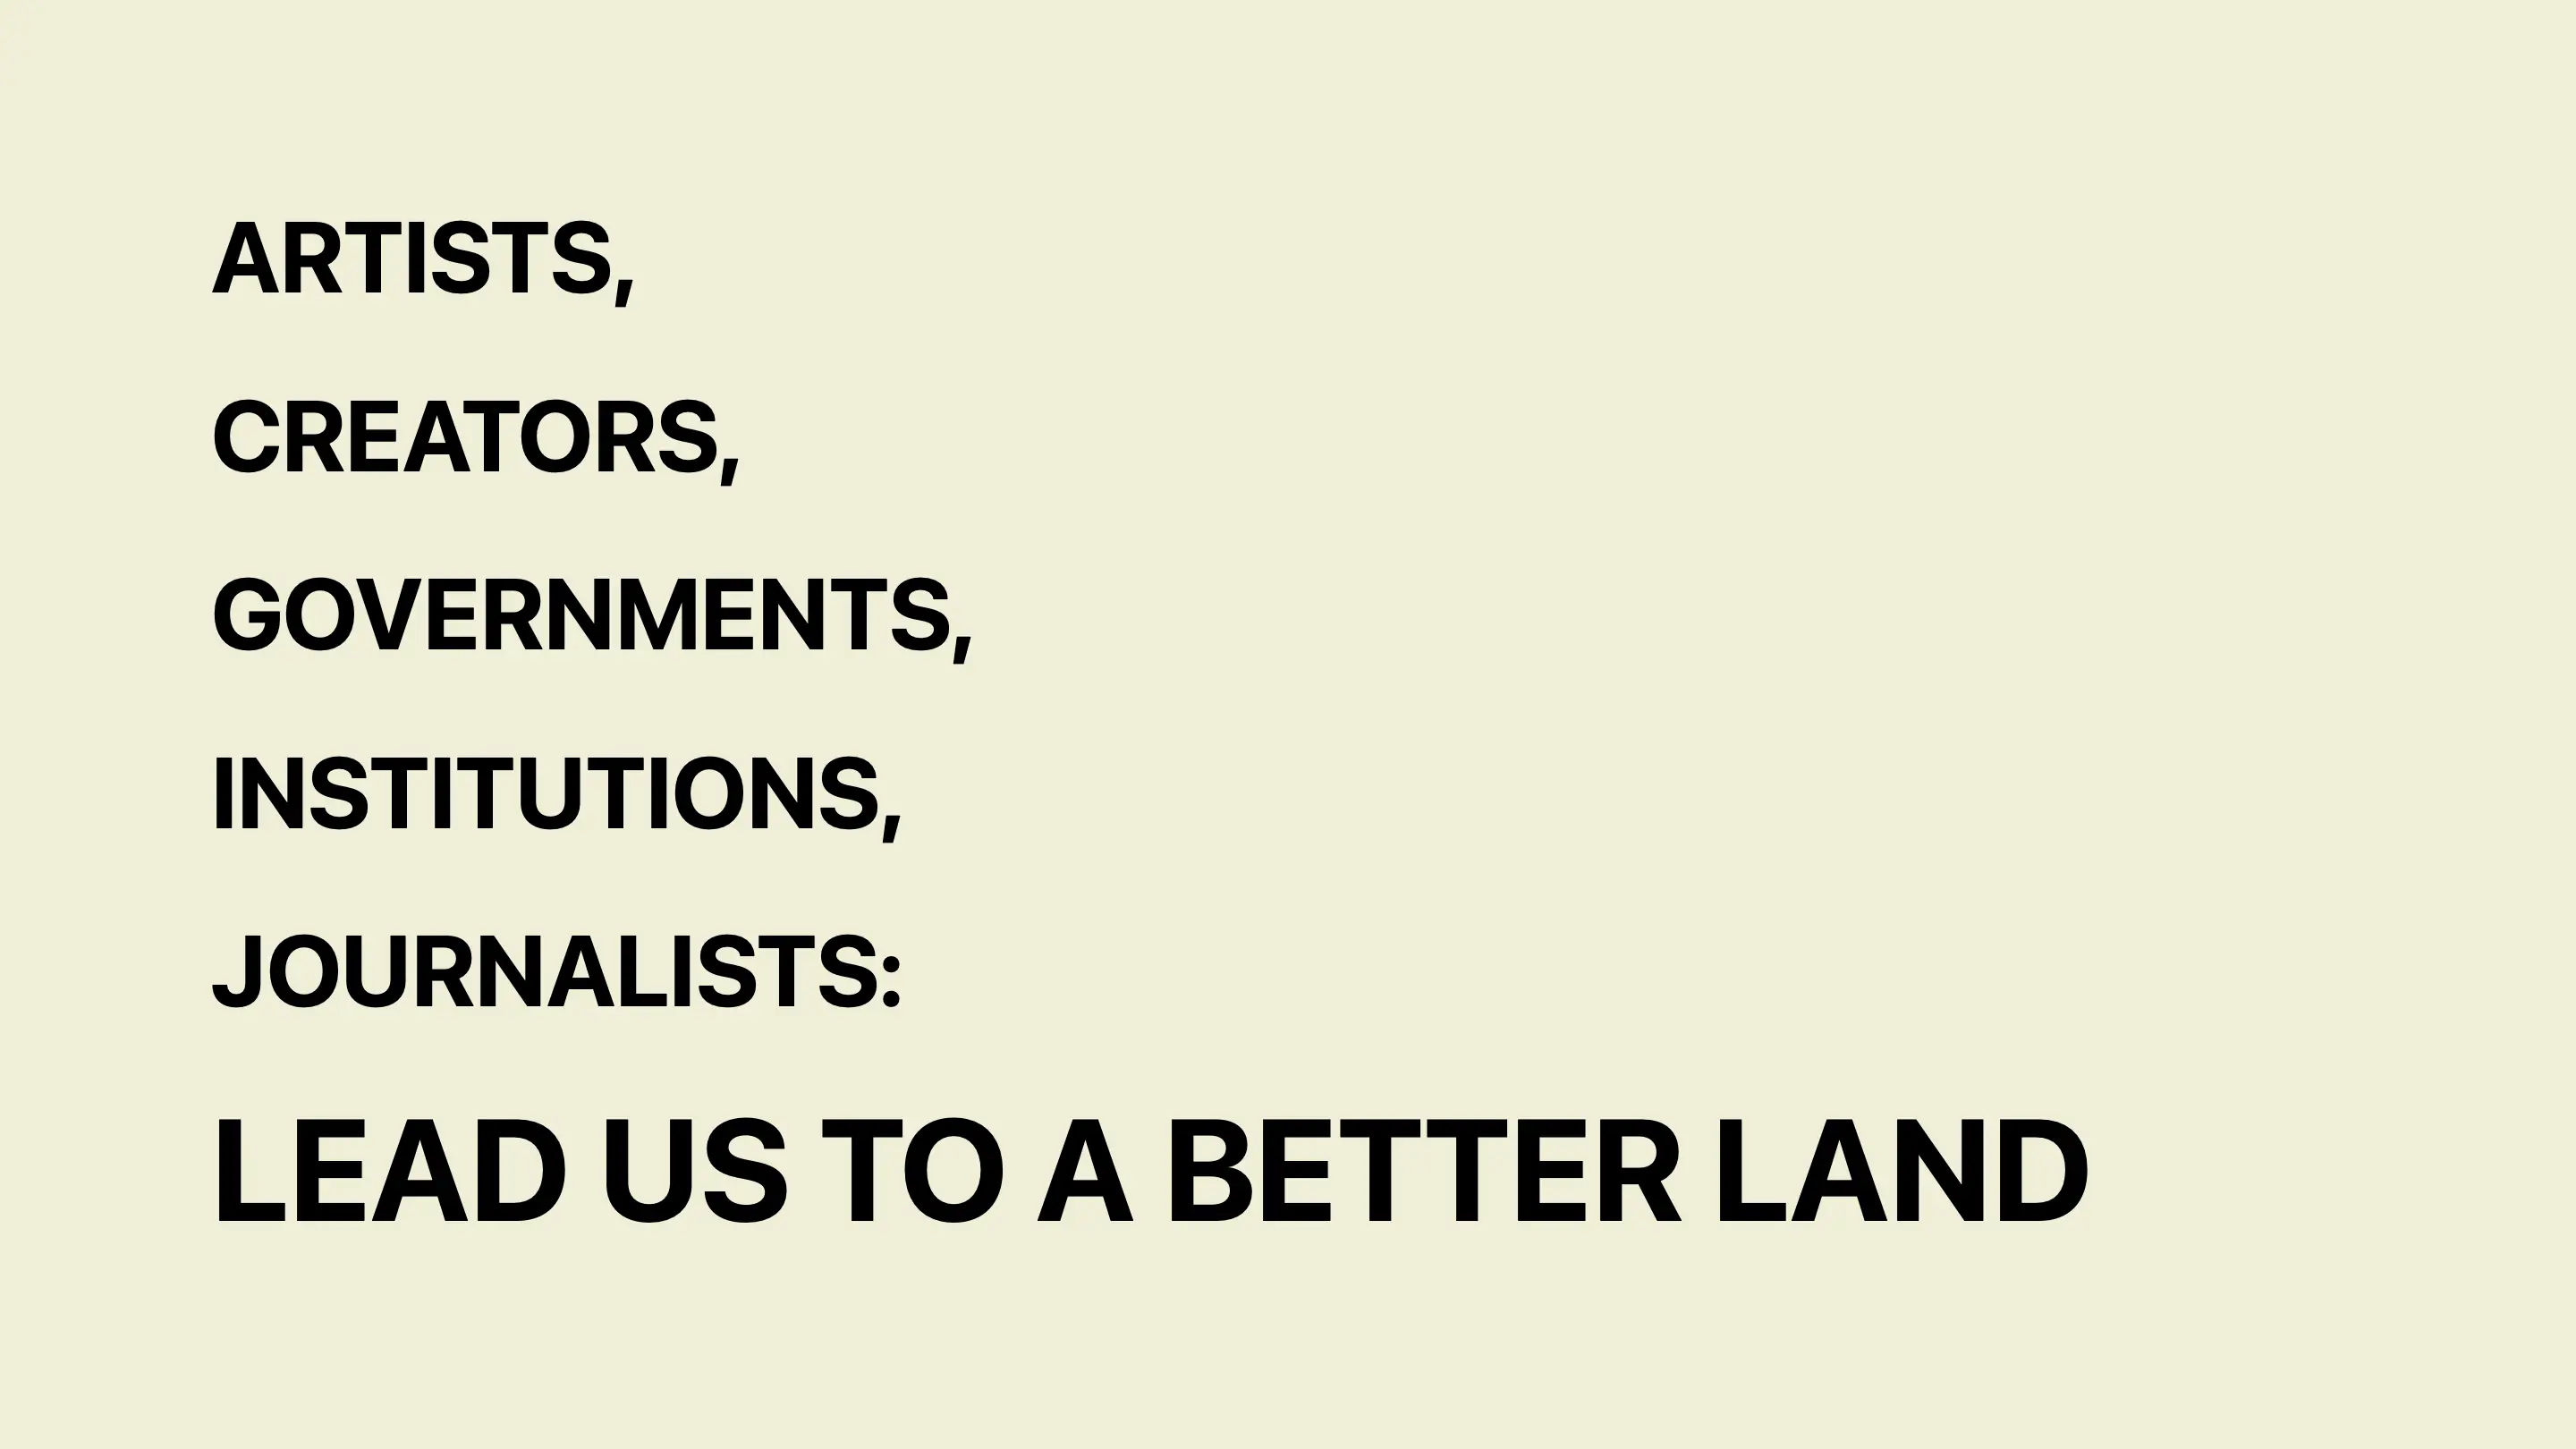 Artists, creators, governments, institutions, journalists: lead us to a better land.